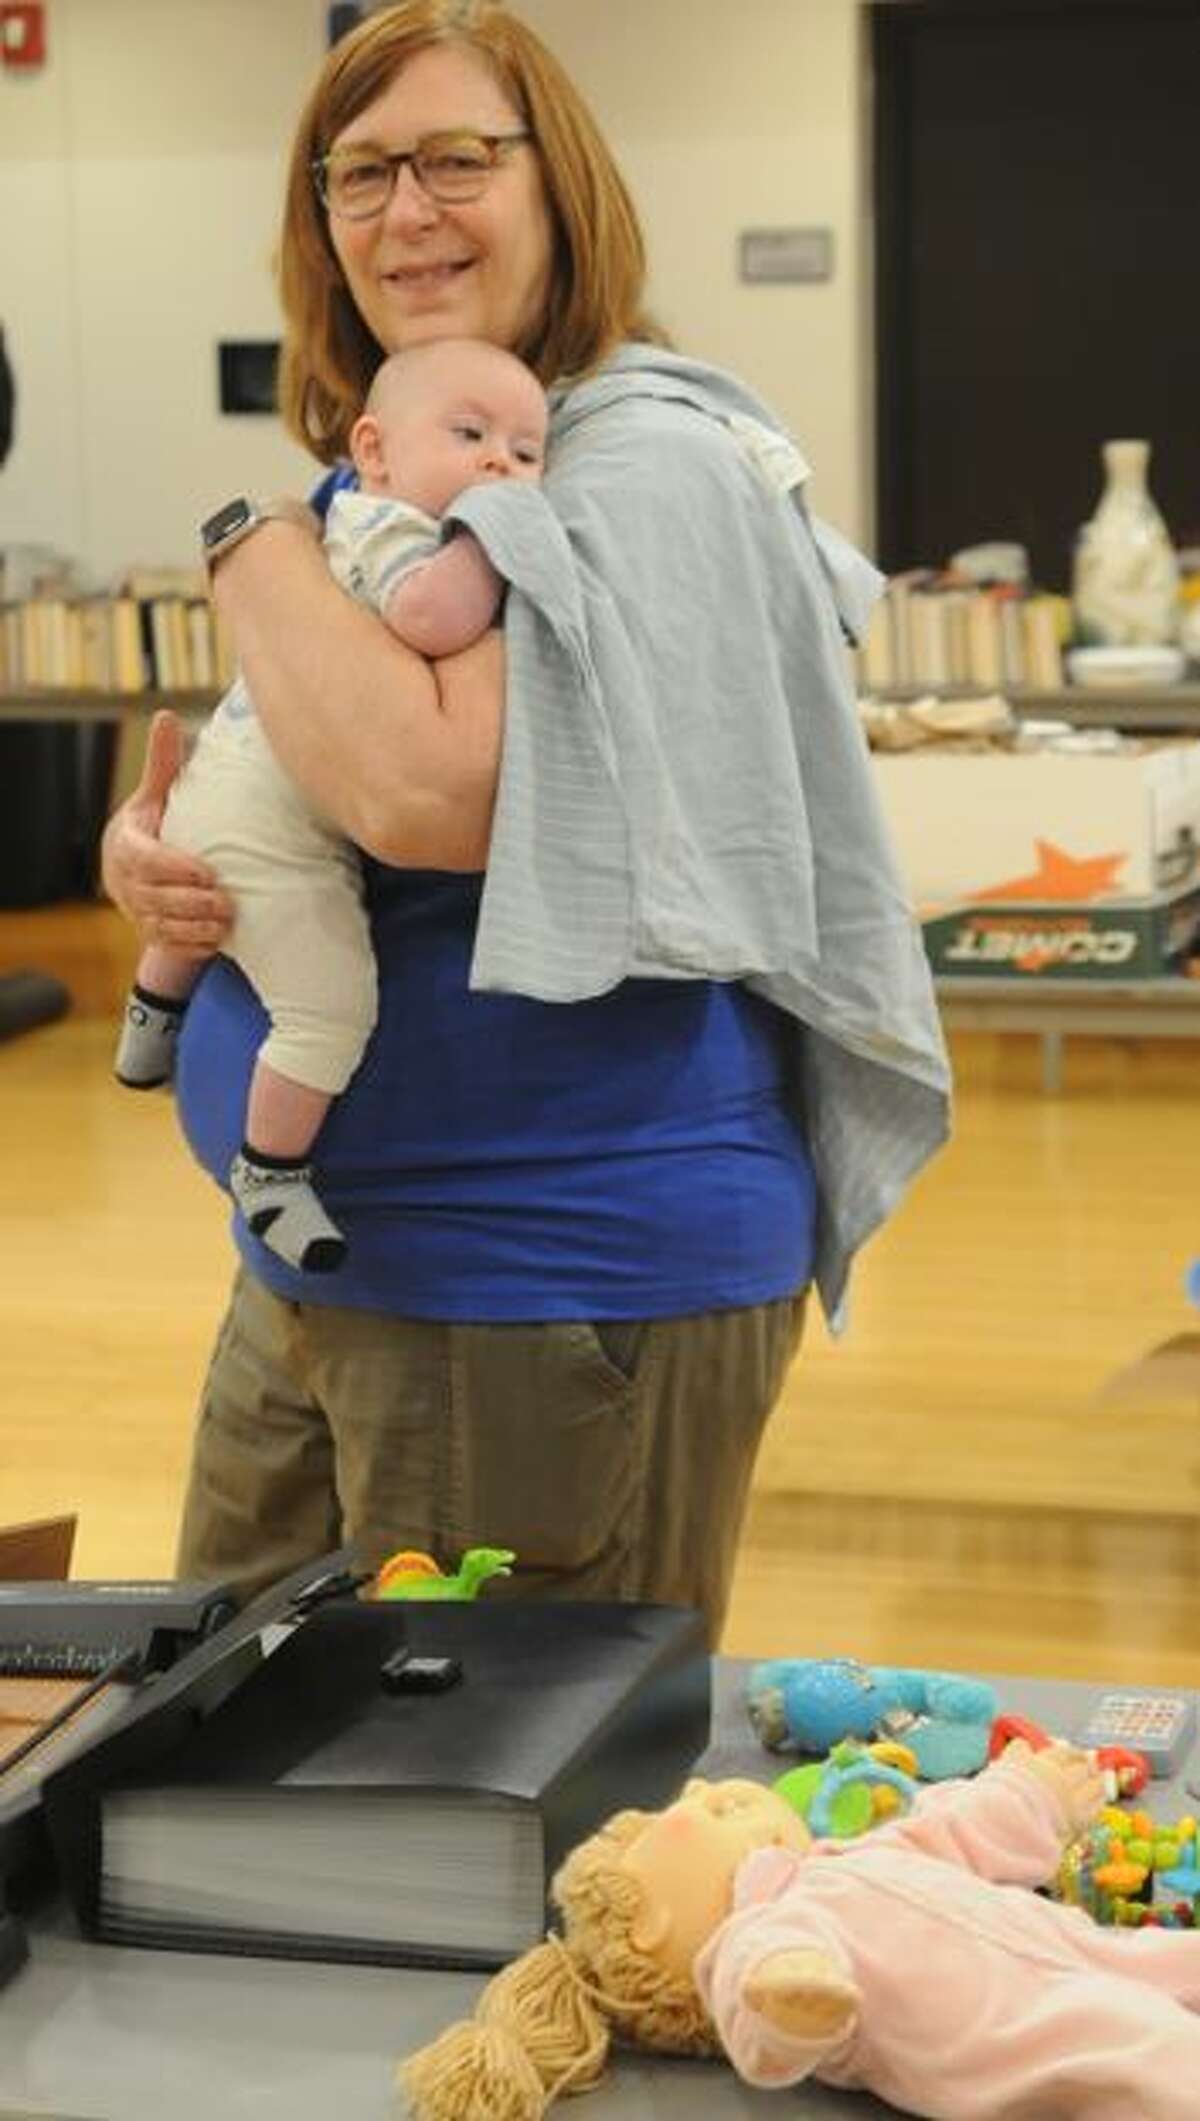 Barb Van Walleghen of Jerseyville holds a friend's baby as she shops during the Jensen's Little Heart Rummage Sale on Saturday.   